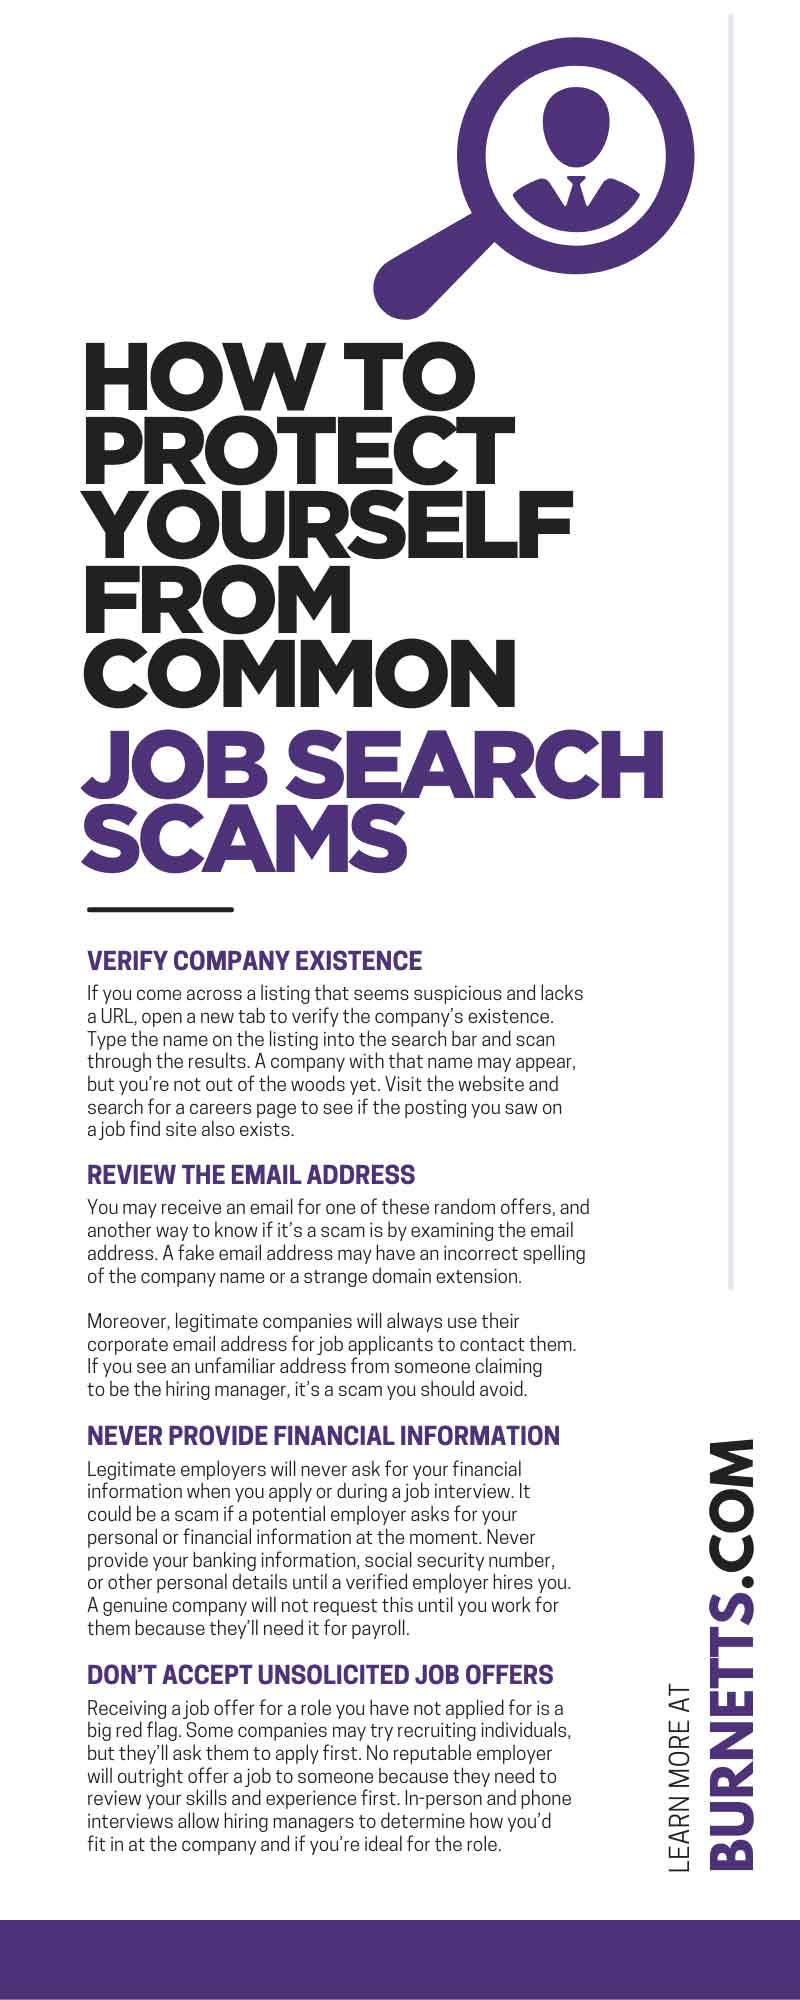 How To Protect Yourself From Common Job Search Scams